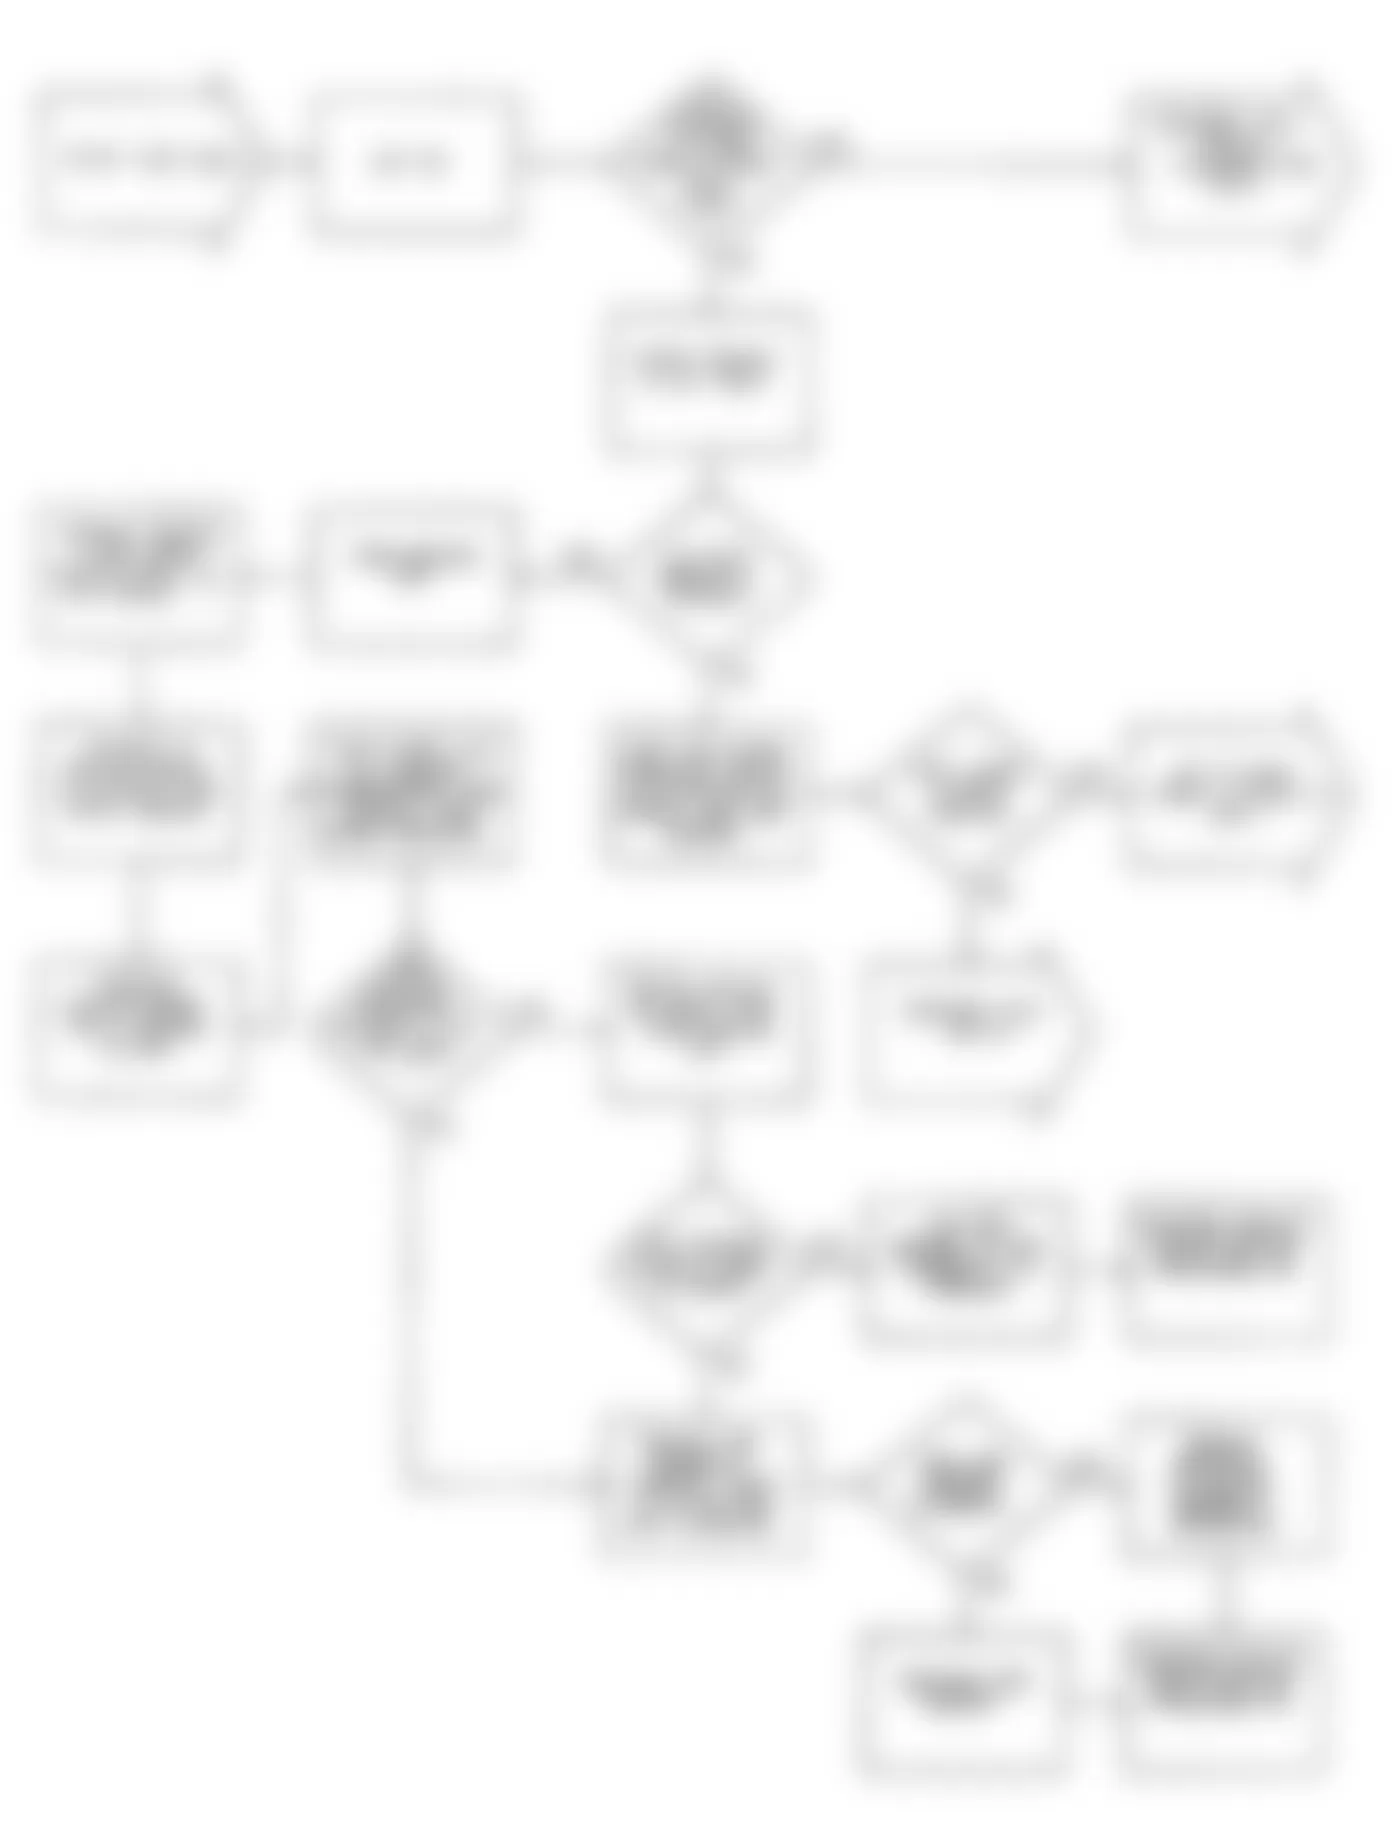 Chrysler New Yorker Salon 1990 - Component Locations -  DR2: Flow Chart